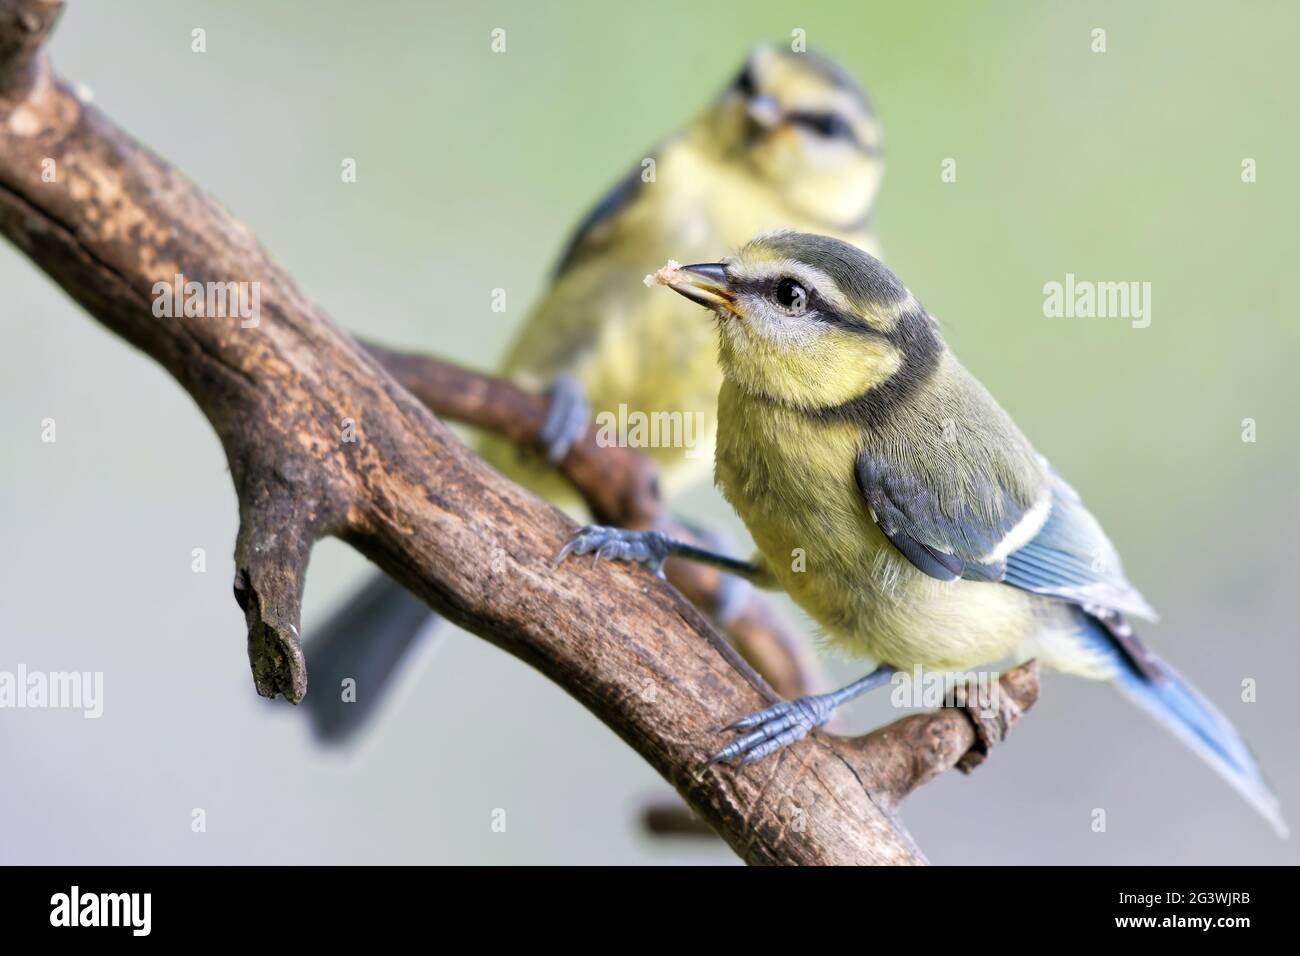 Young Blue Tit Stockfoto